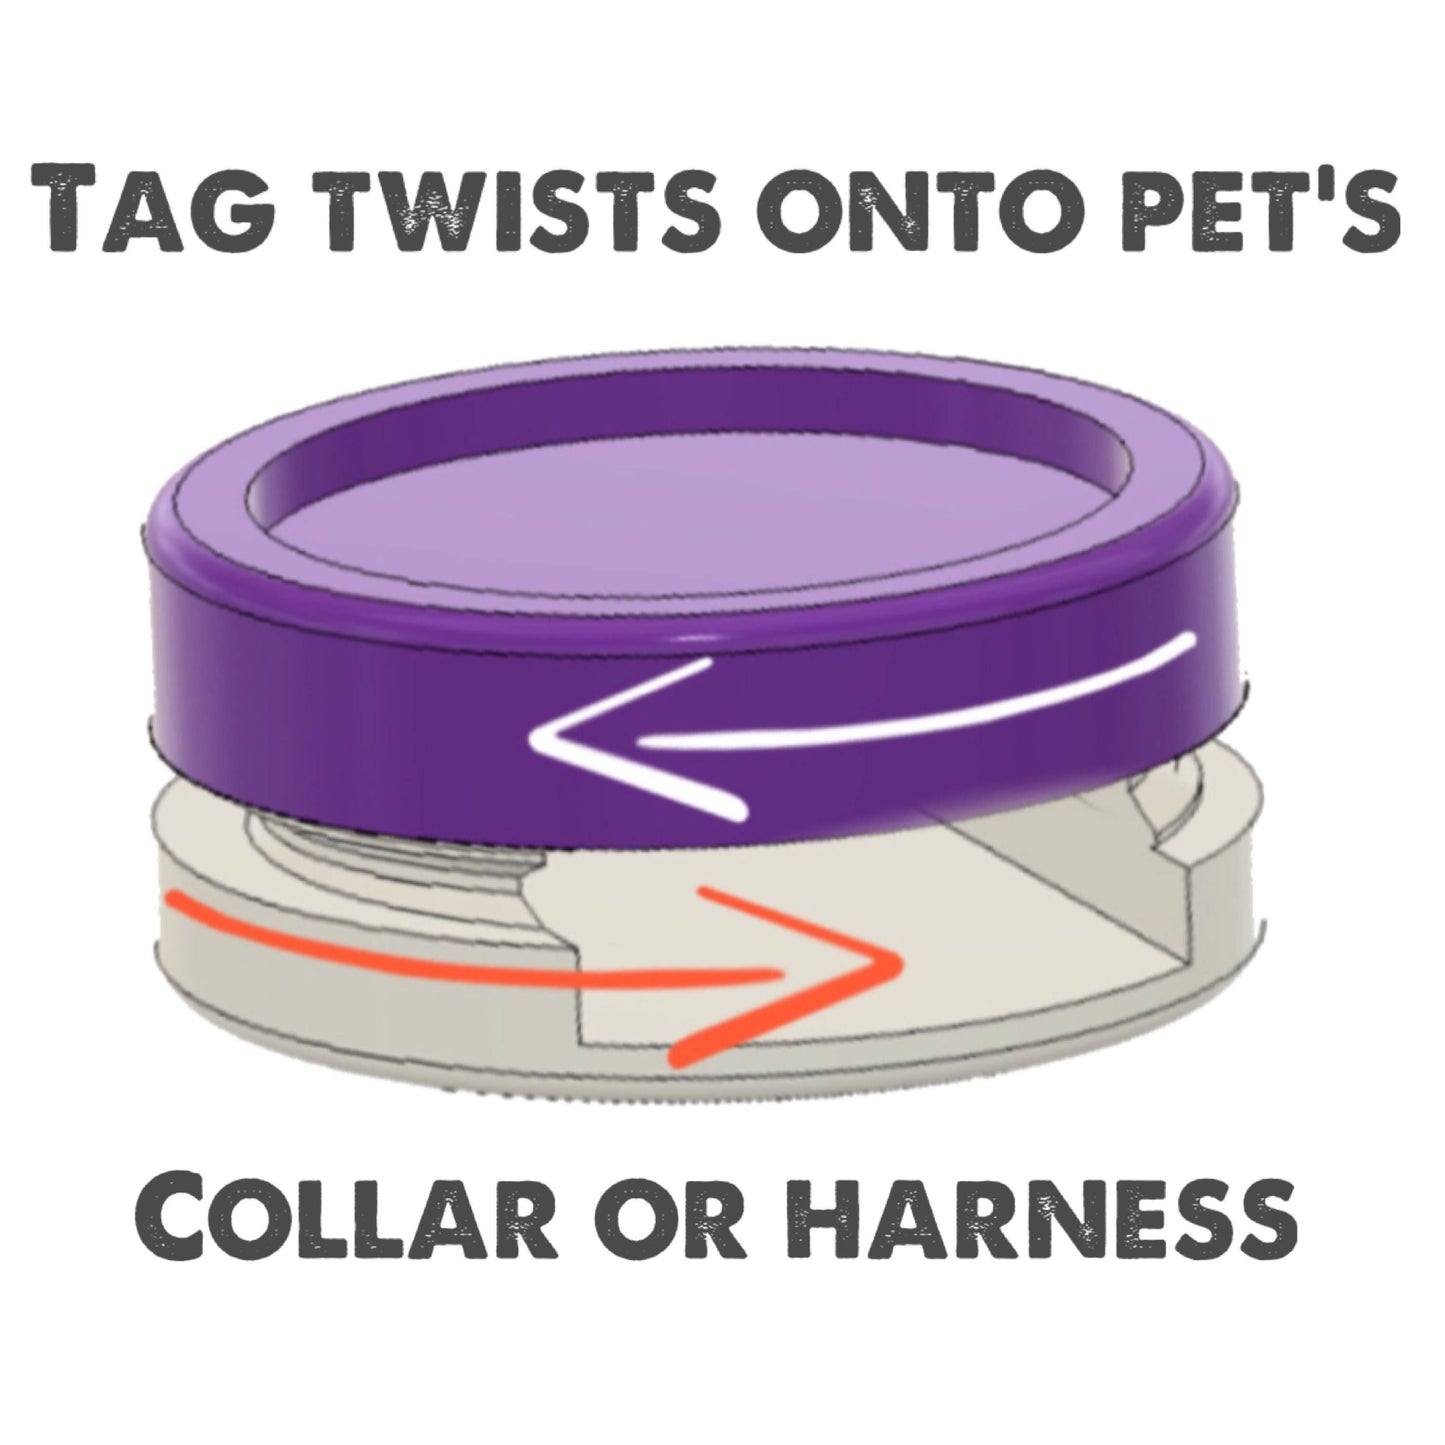 Best Budz- Silent, Eco-Friendly, Ringless ID Tag for Cats and Dogs Best Buds Cannabis Design CBD THC